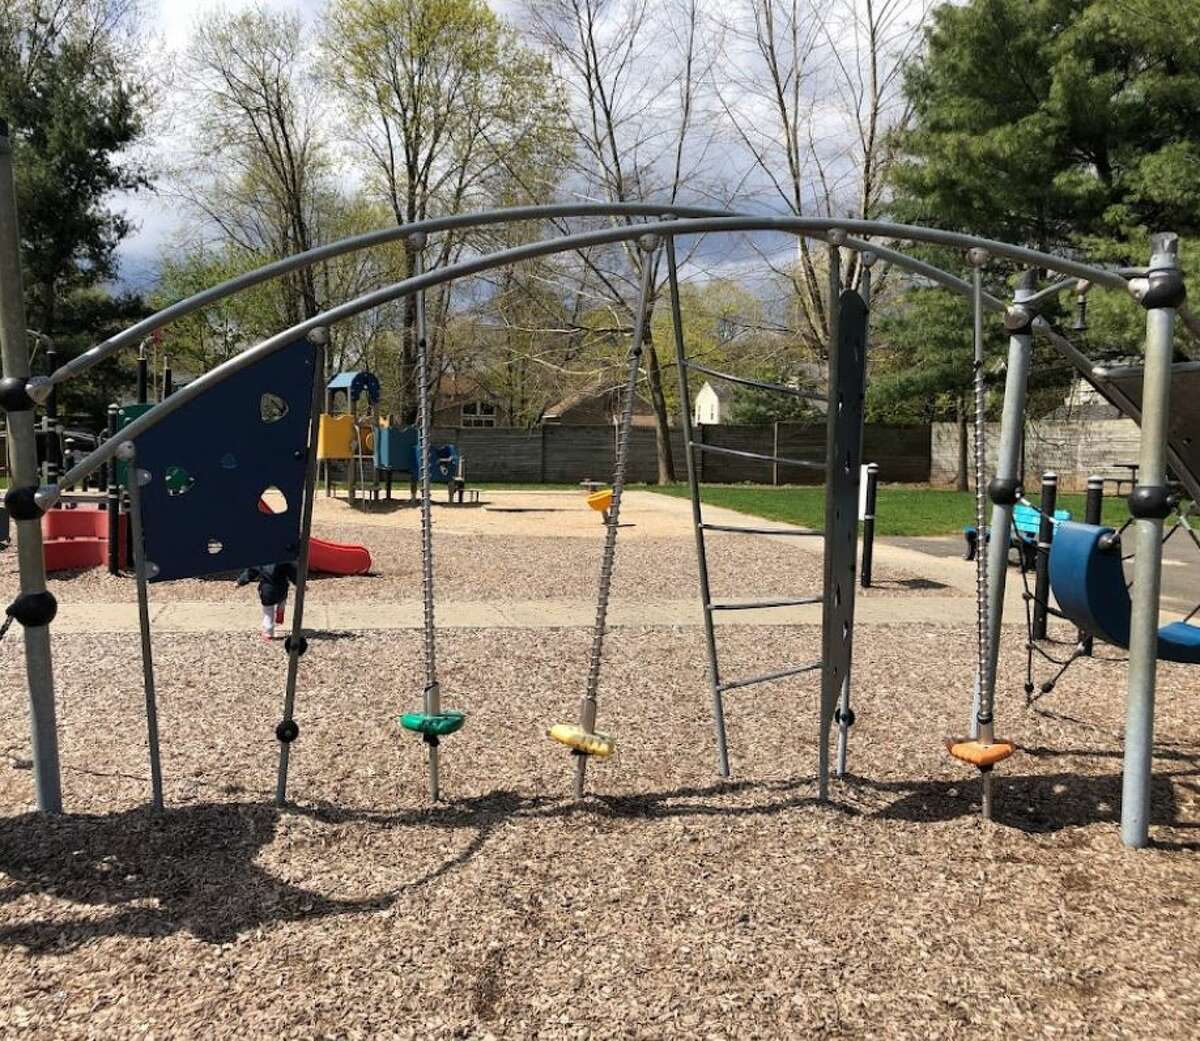 This is the part of the playscape at Doolittle Park in Wallingford that police say was set on fire over the weekend. 